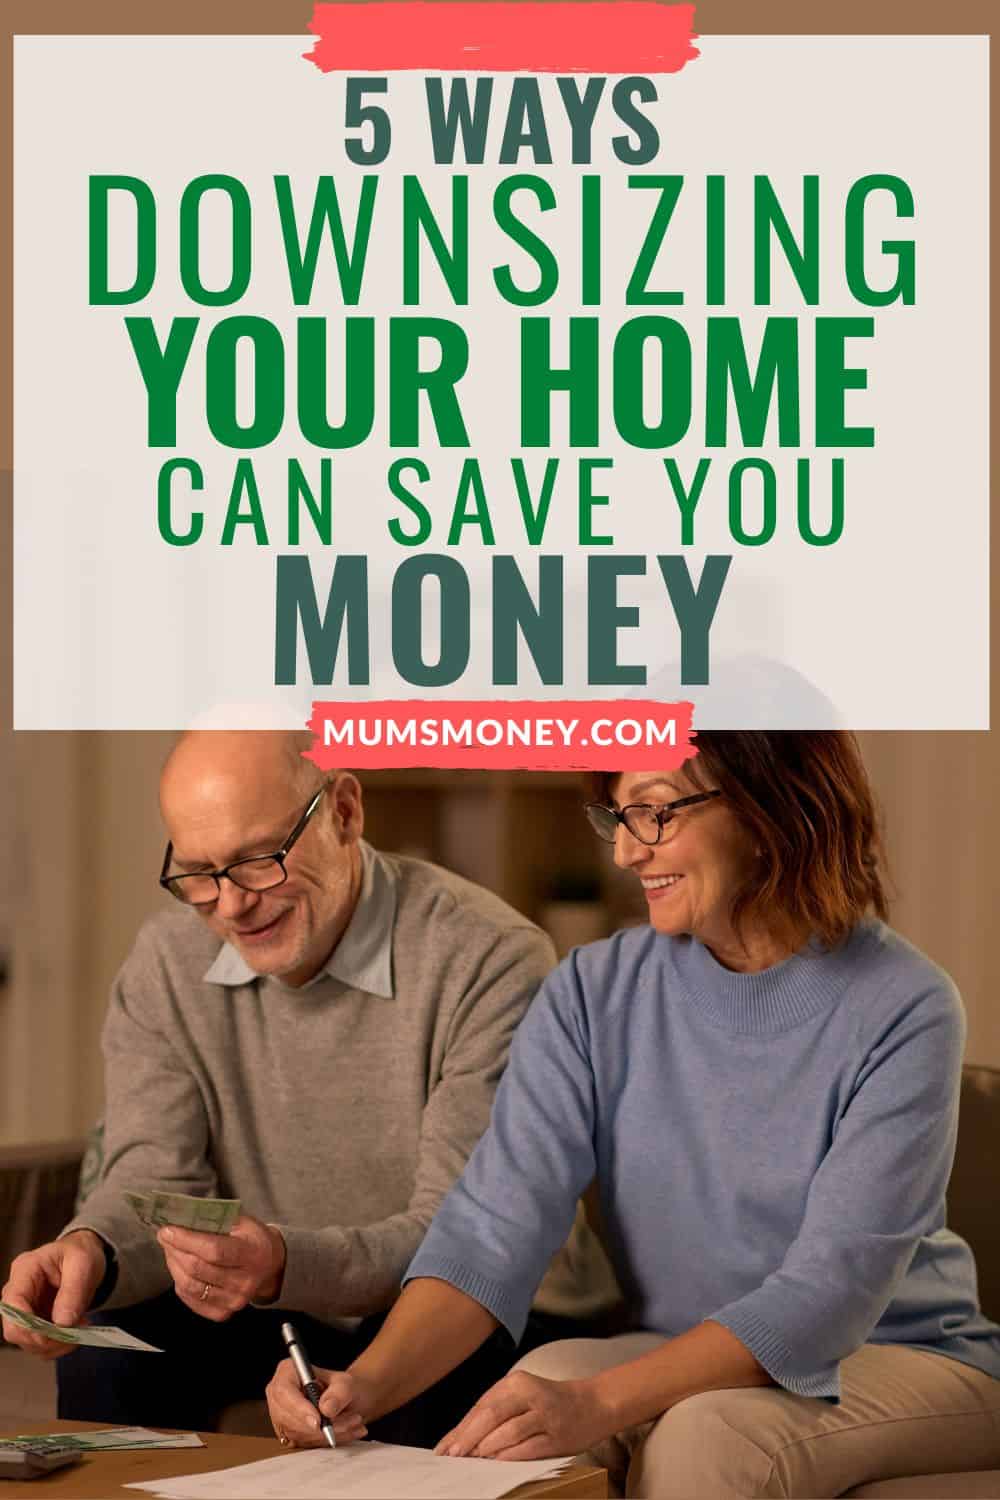 Photo showing a couple siting on a sofa with text overlay that reads 5 ways downsizing your home can save you money